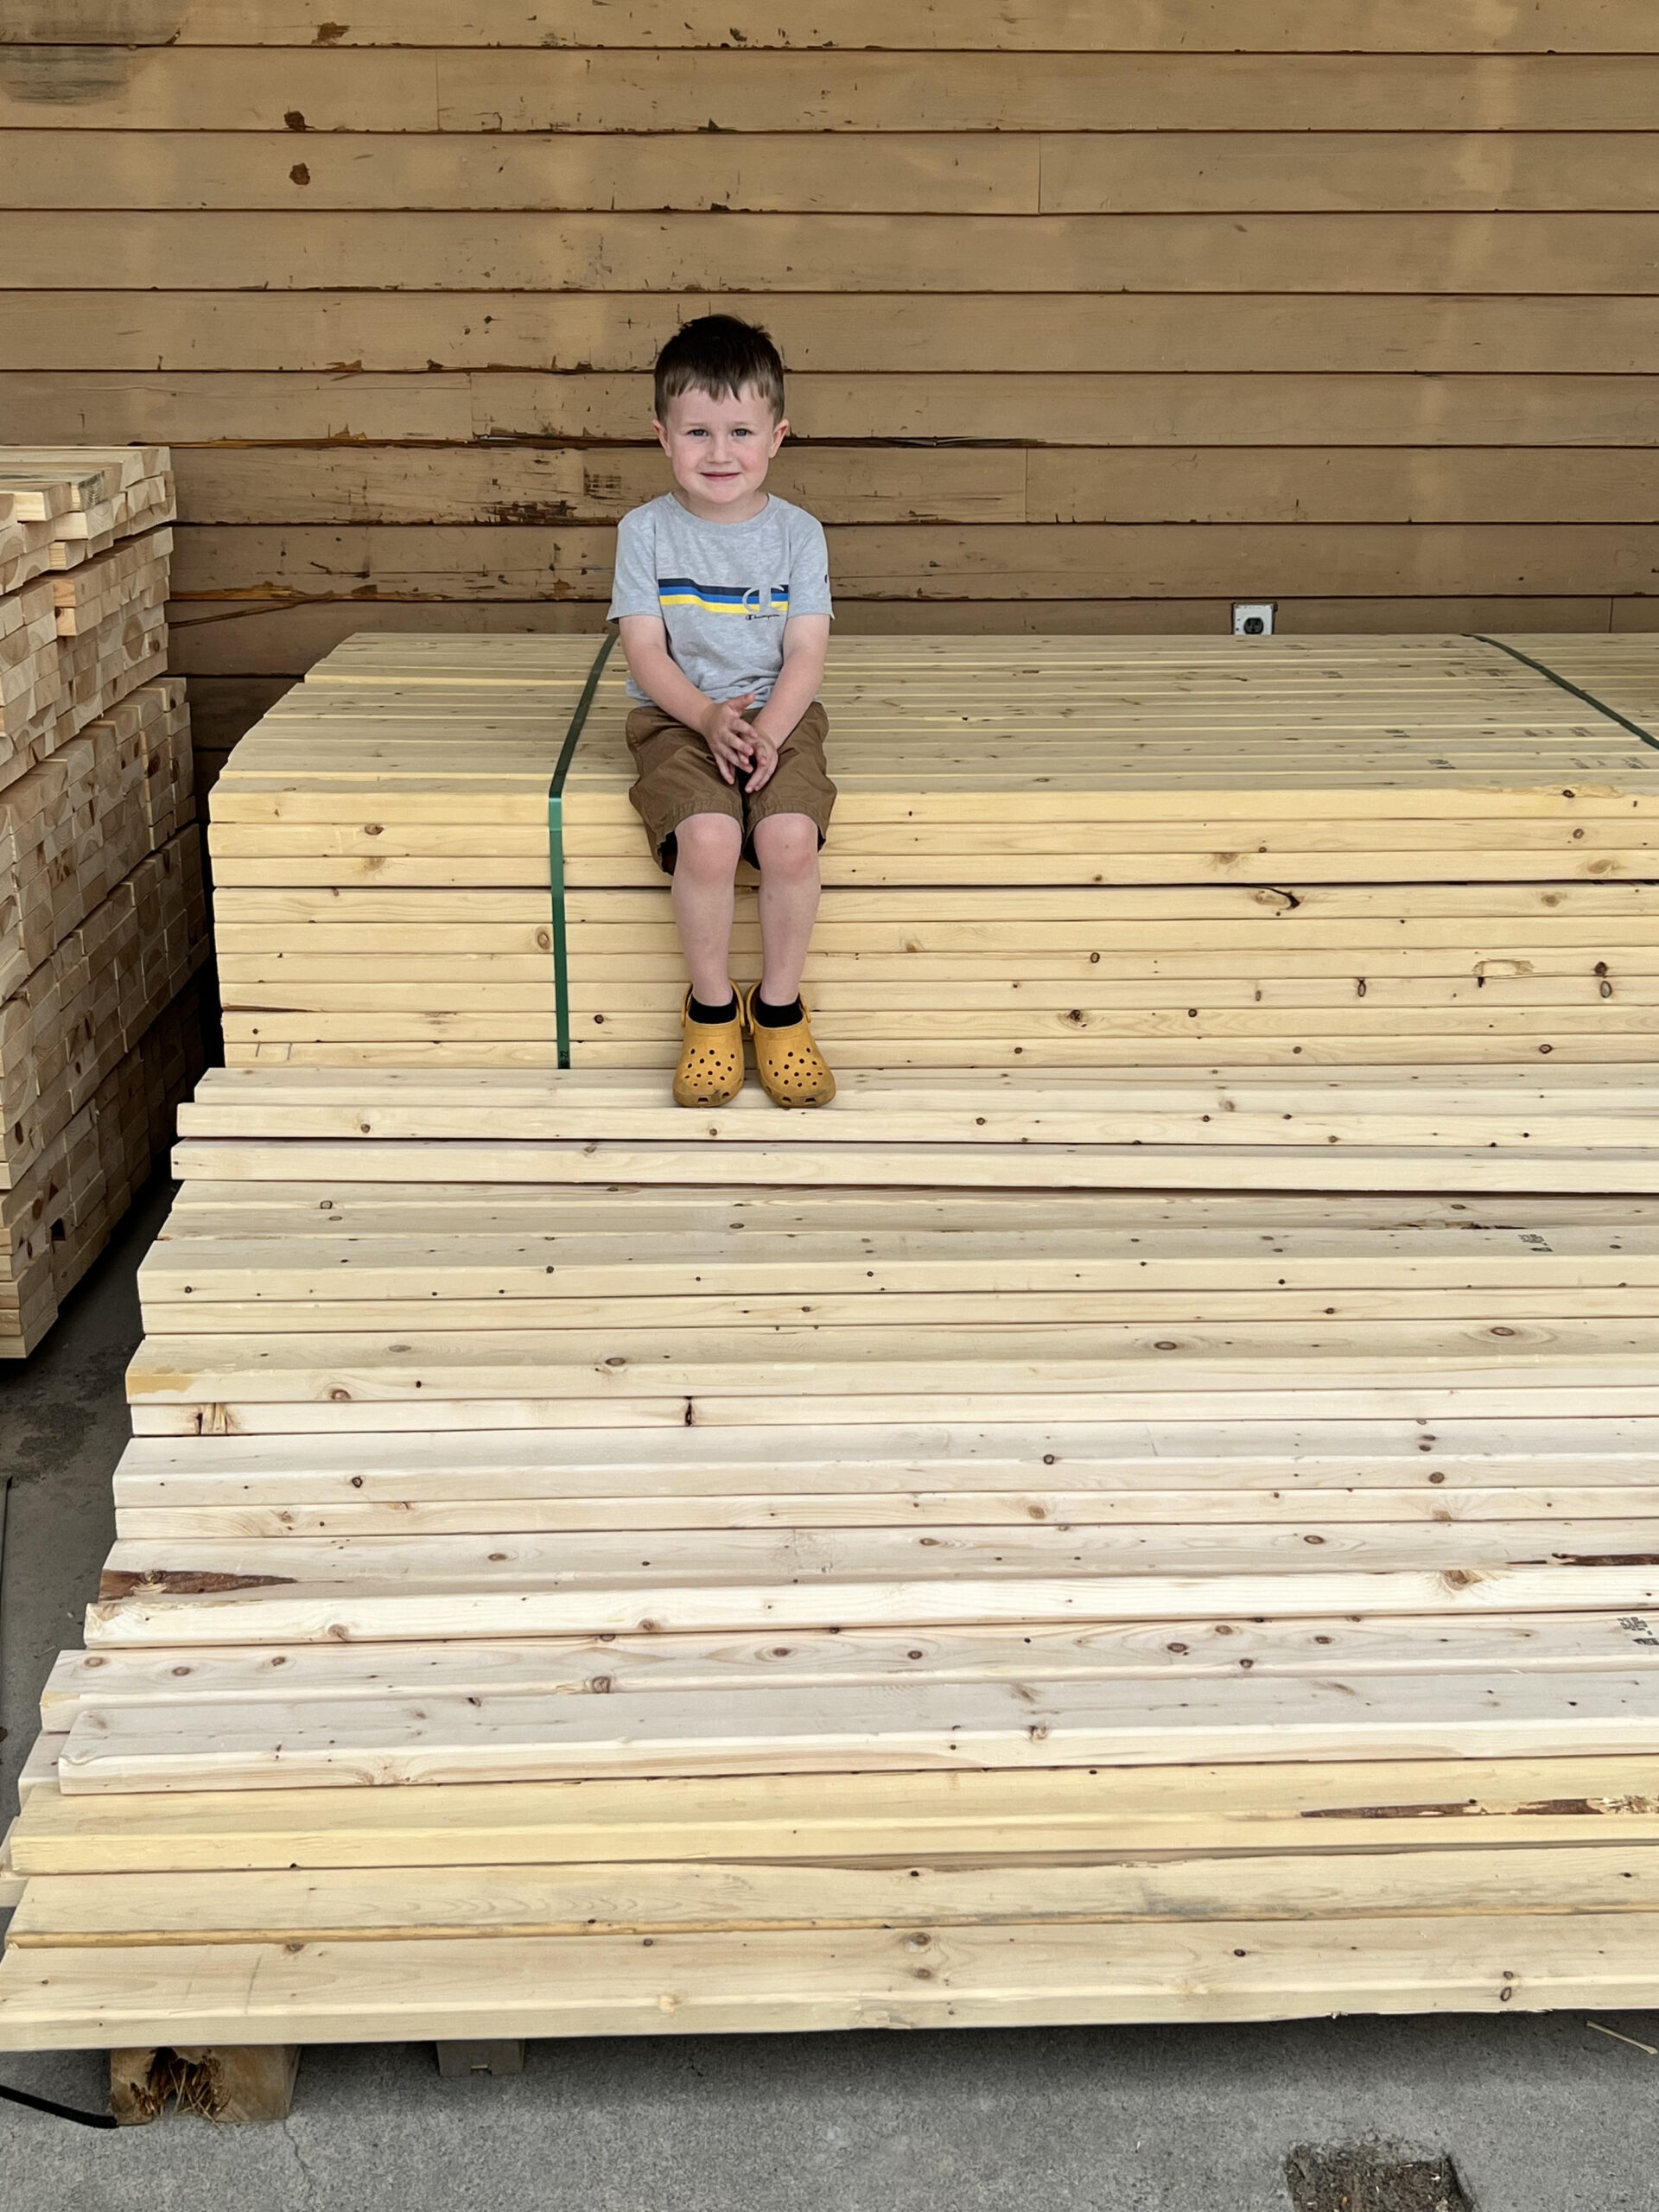 Young child sitting on wooden planks